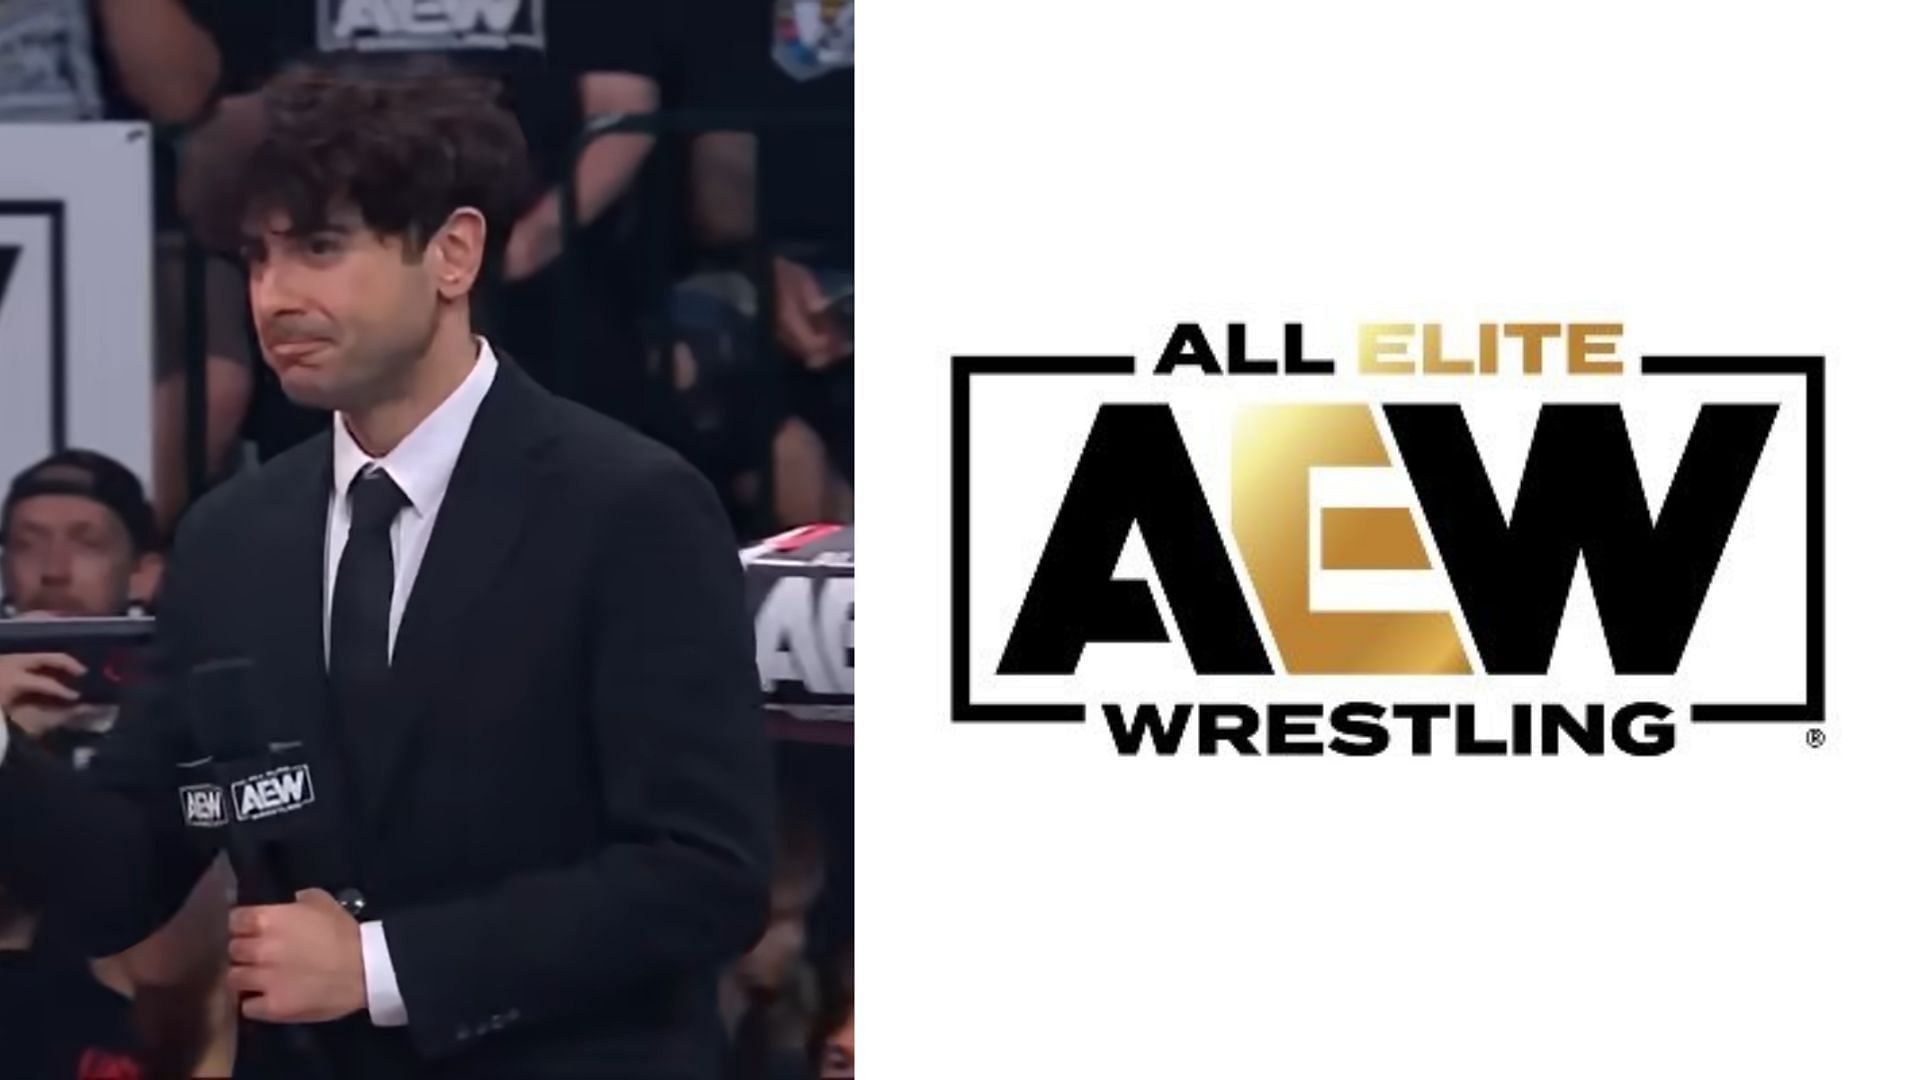 Tony Khan is the primary booker of AEW and ROH